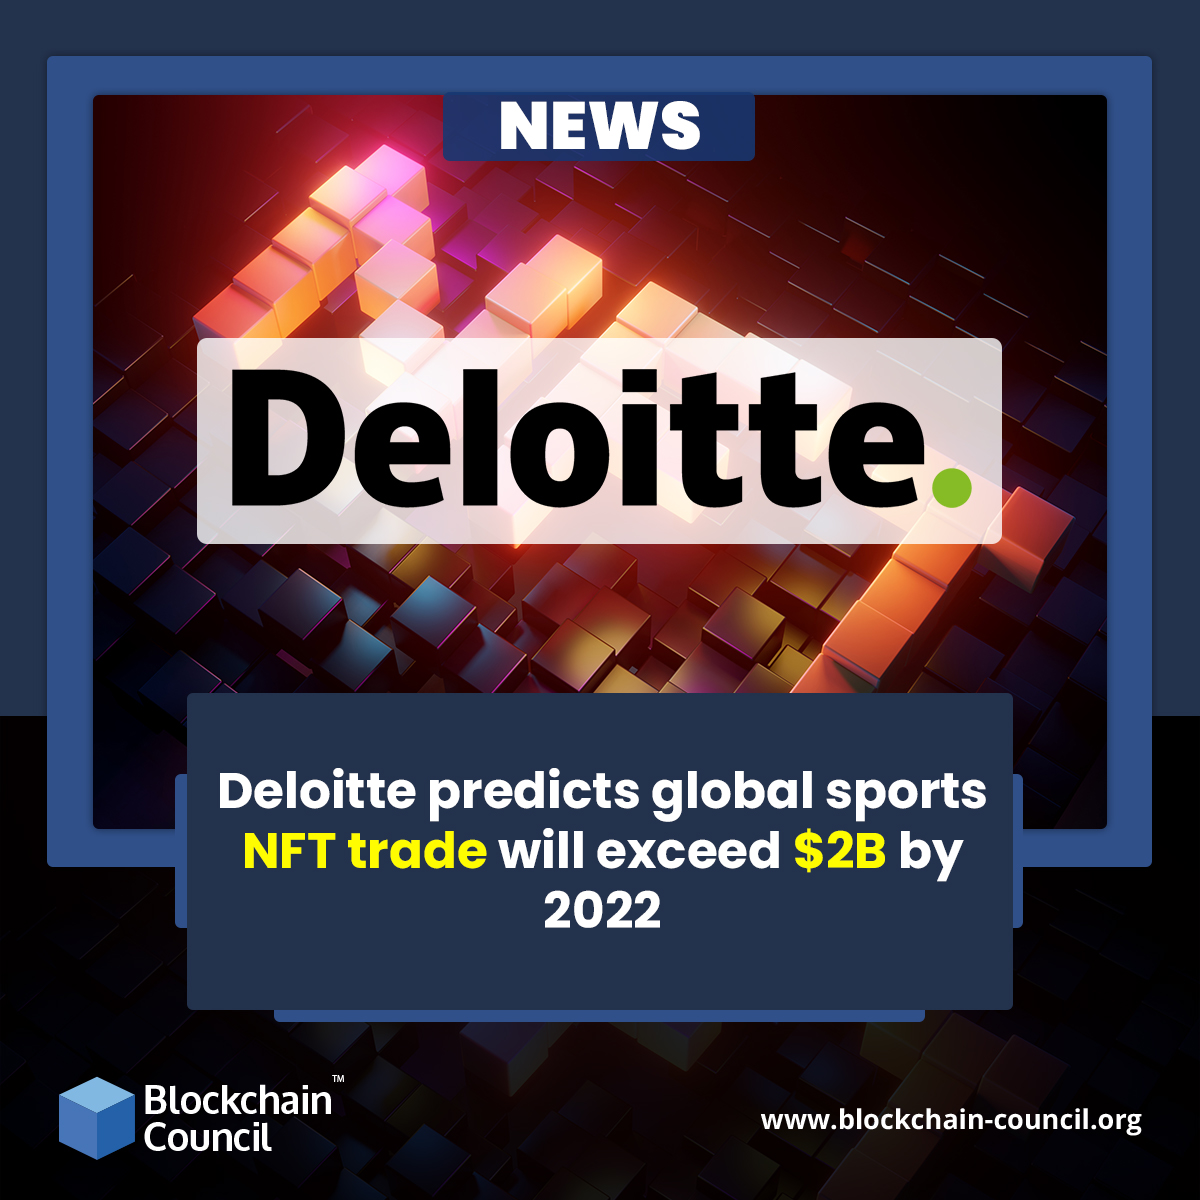 Deloitte predicts global sports NFT trade will exceed $2B by 2022